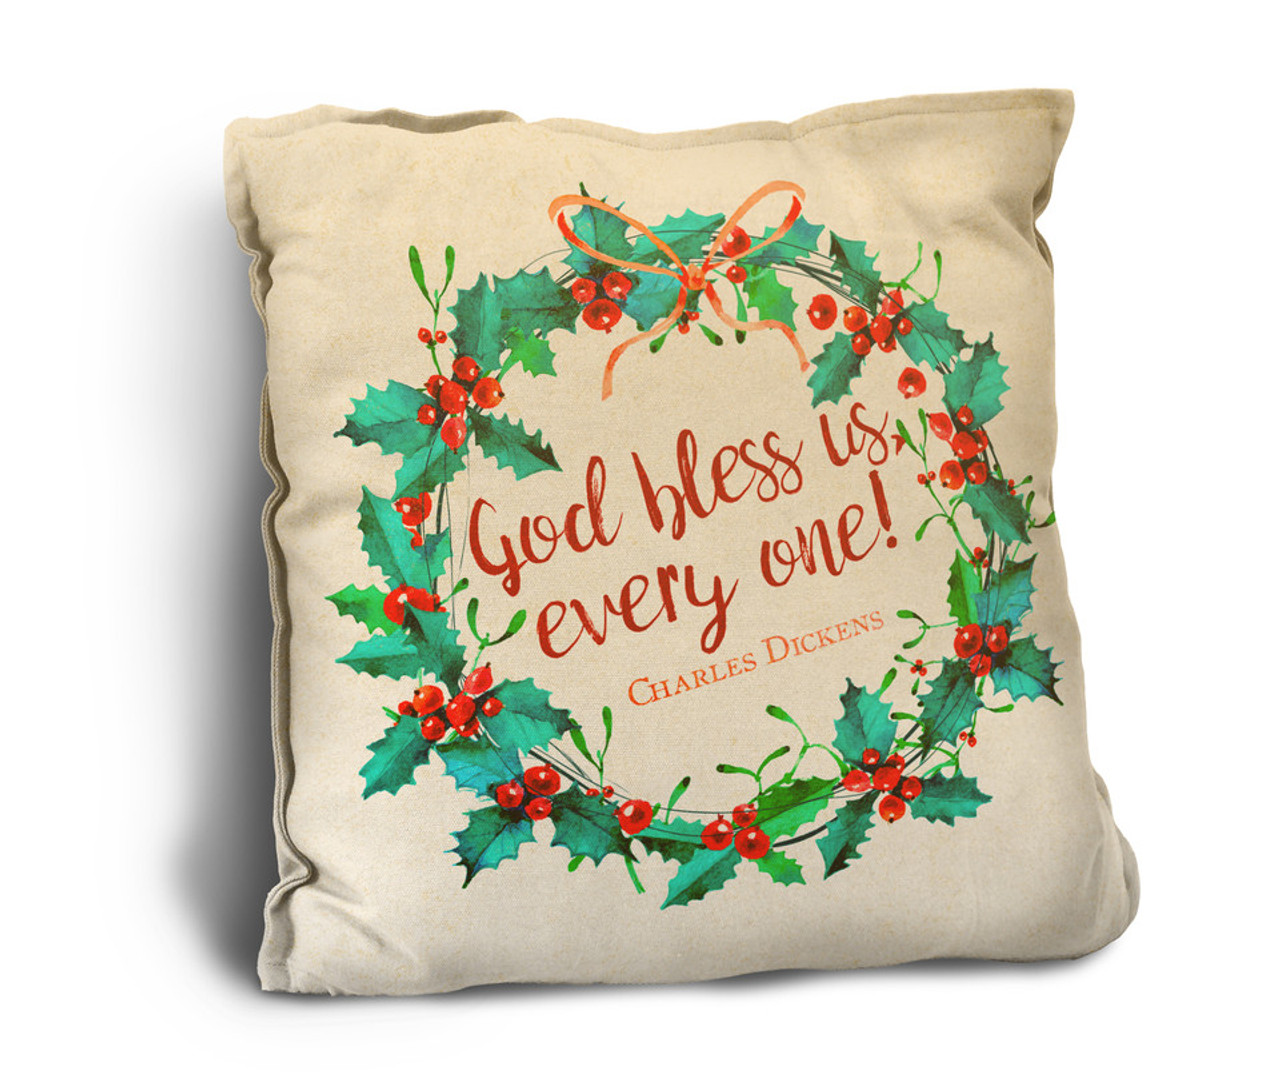 "God Bless Us, Every One" Rustic Pillow